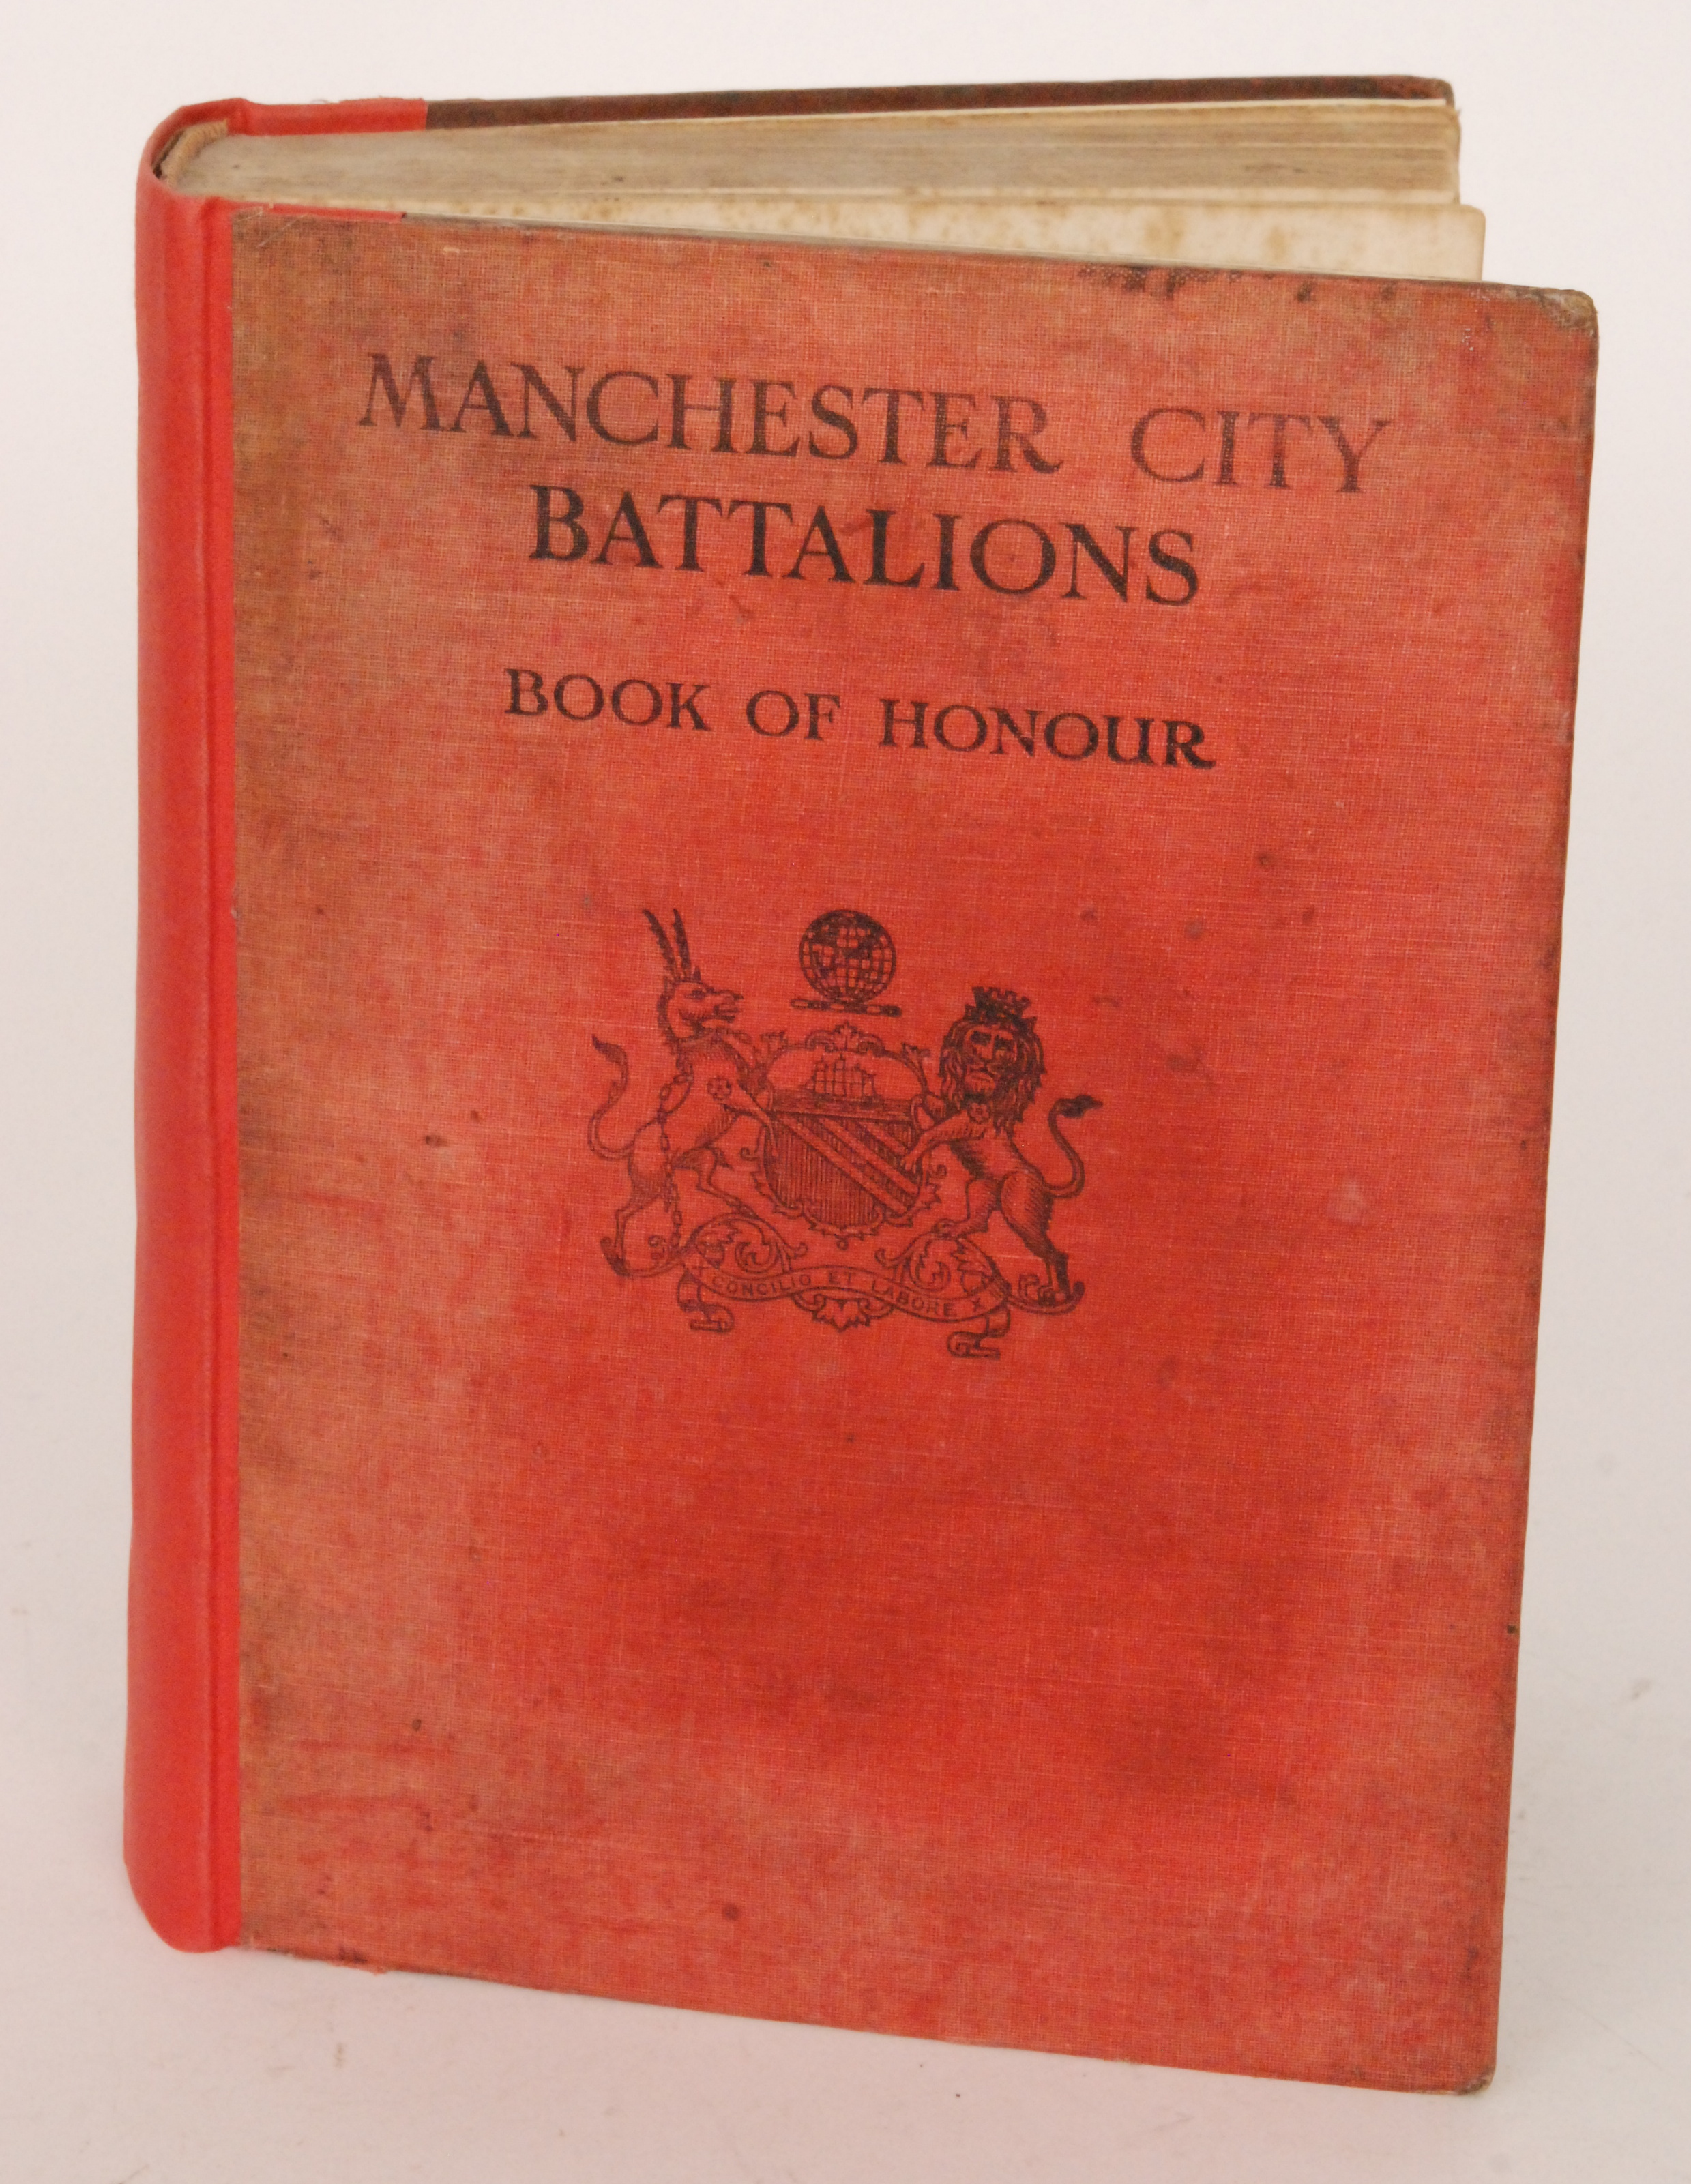 Manchester City Battalions of the 90th & 91st Infantry Brigades Book of Honour edited by